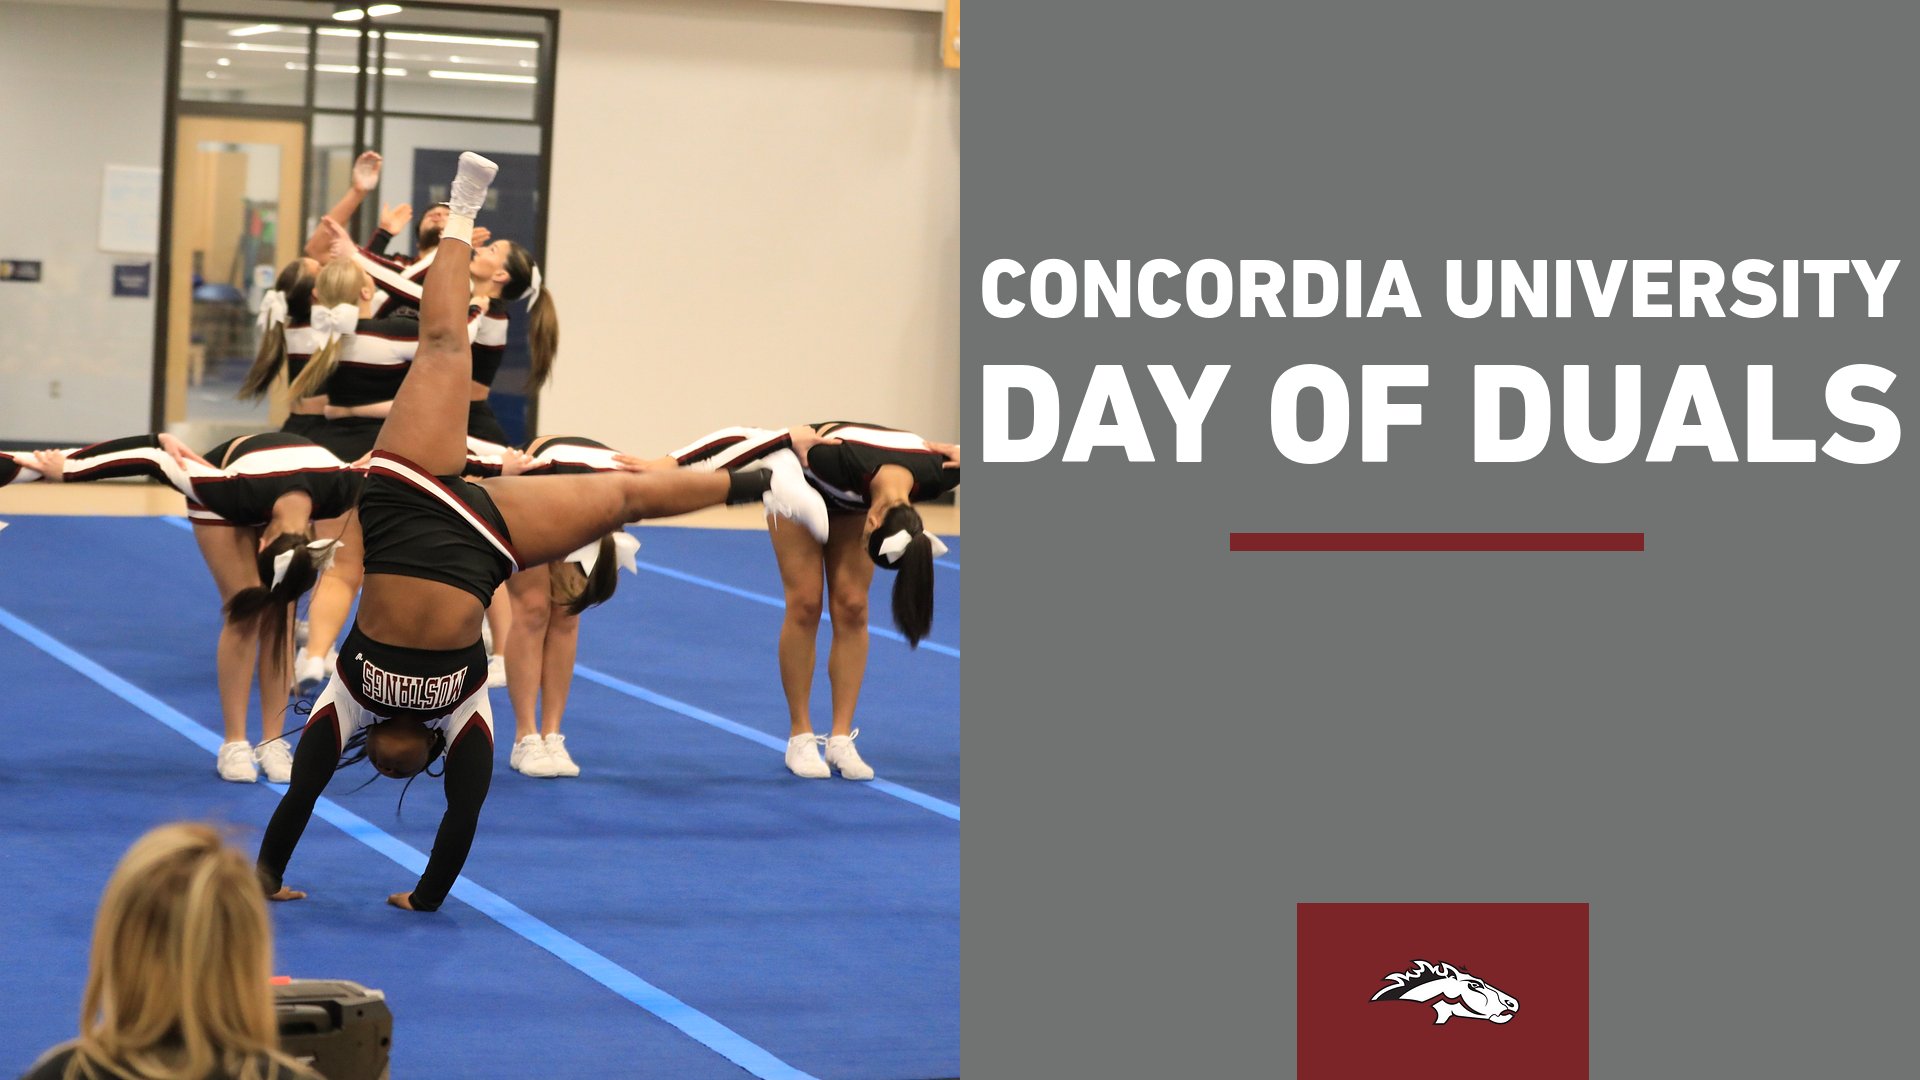 Morningside compete at Concordia University's Day of Duals